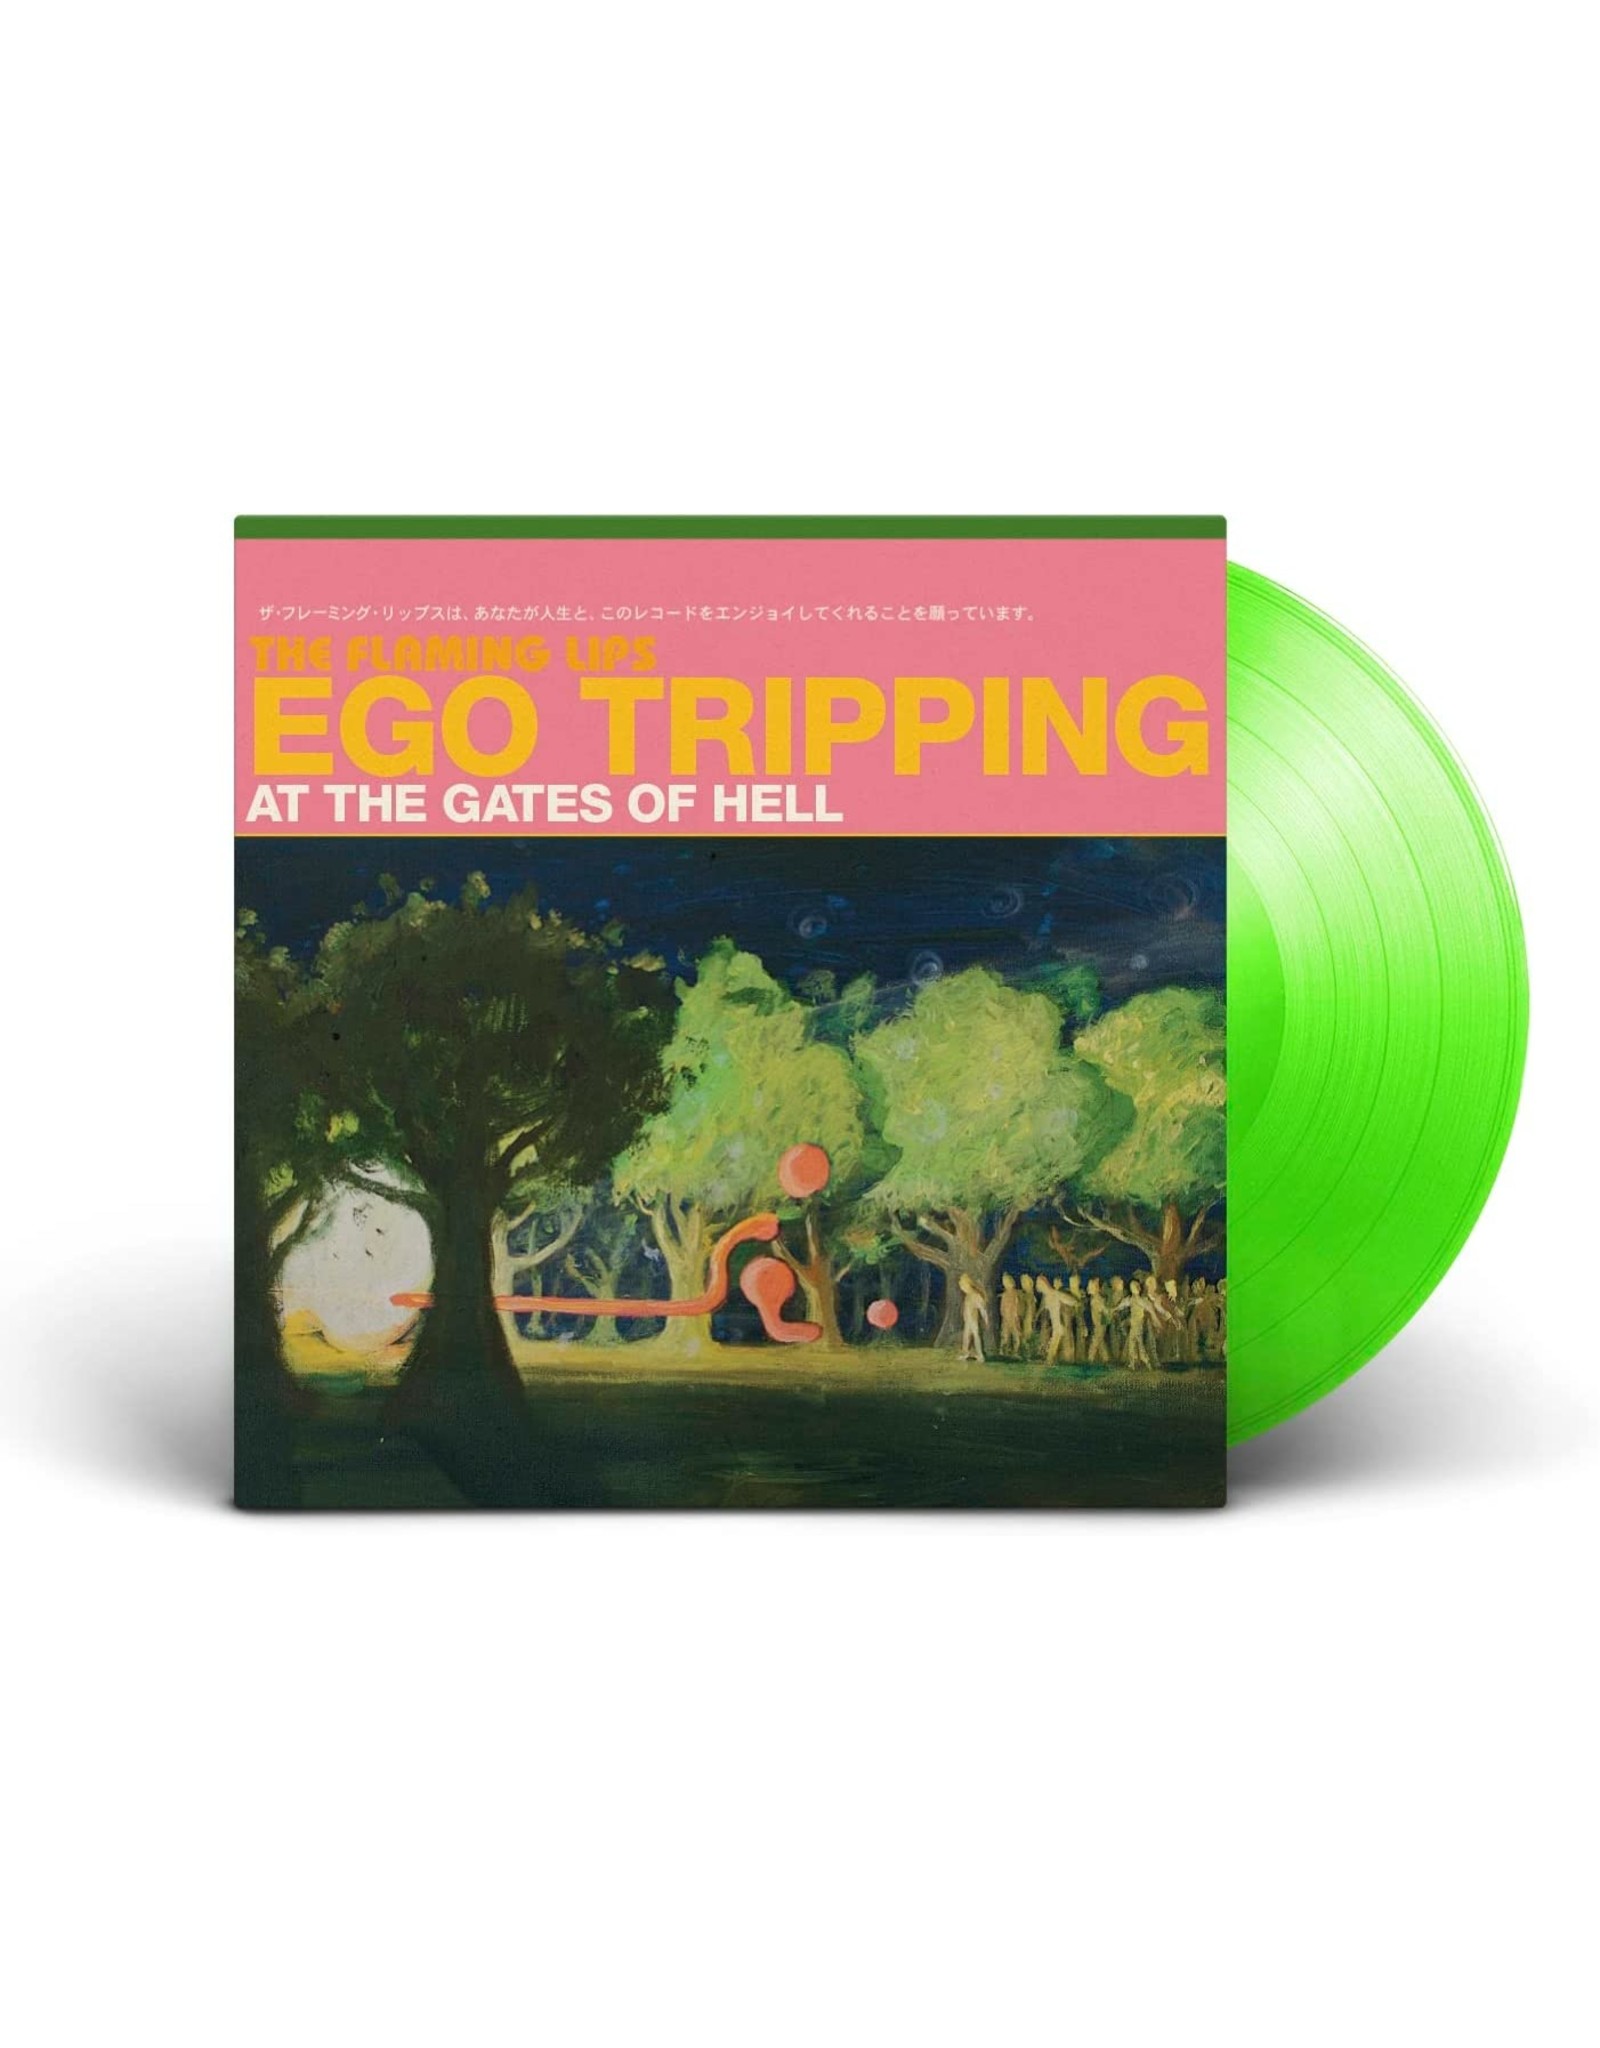 Flaming Lips - Ego Tripping At The Gates Of Hell (Glow In The Dark Green Vinyl)